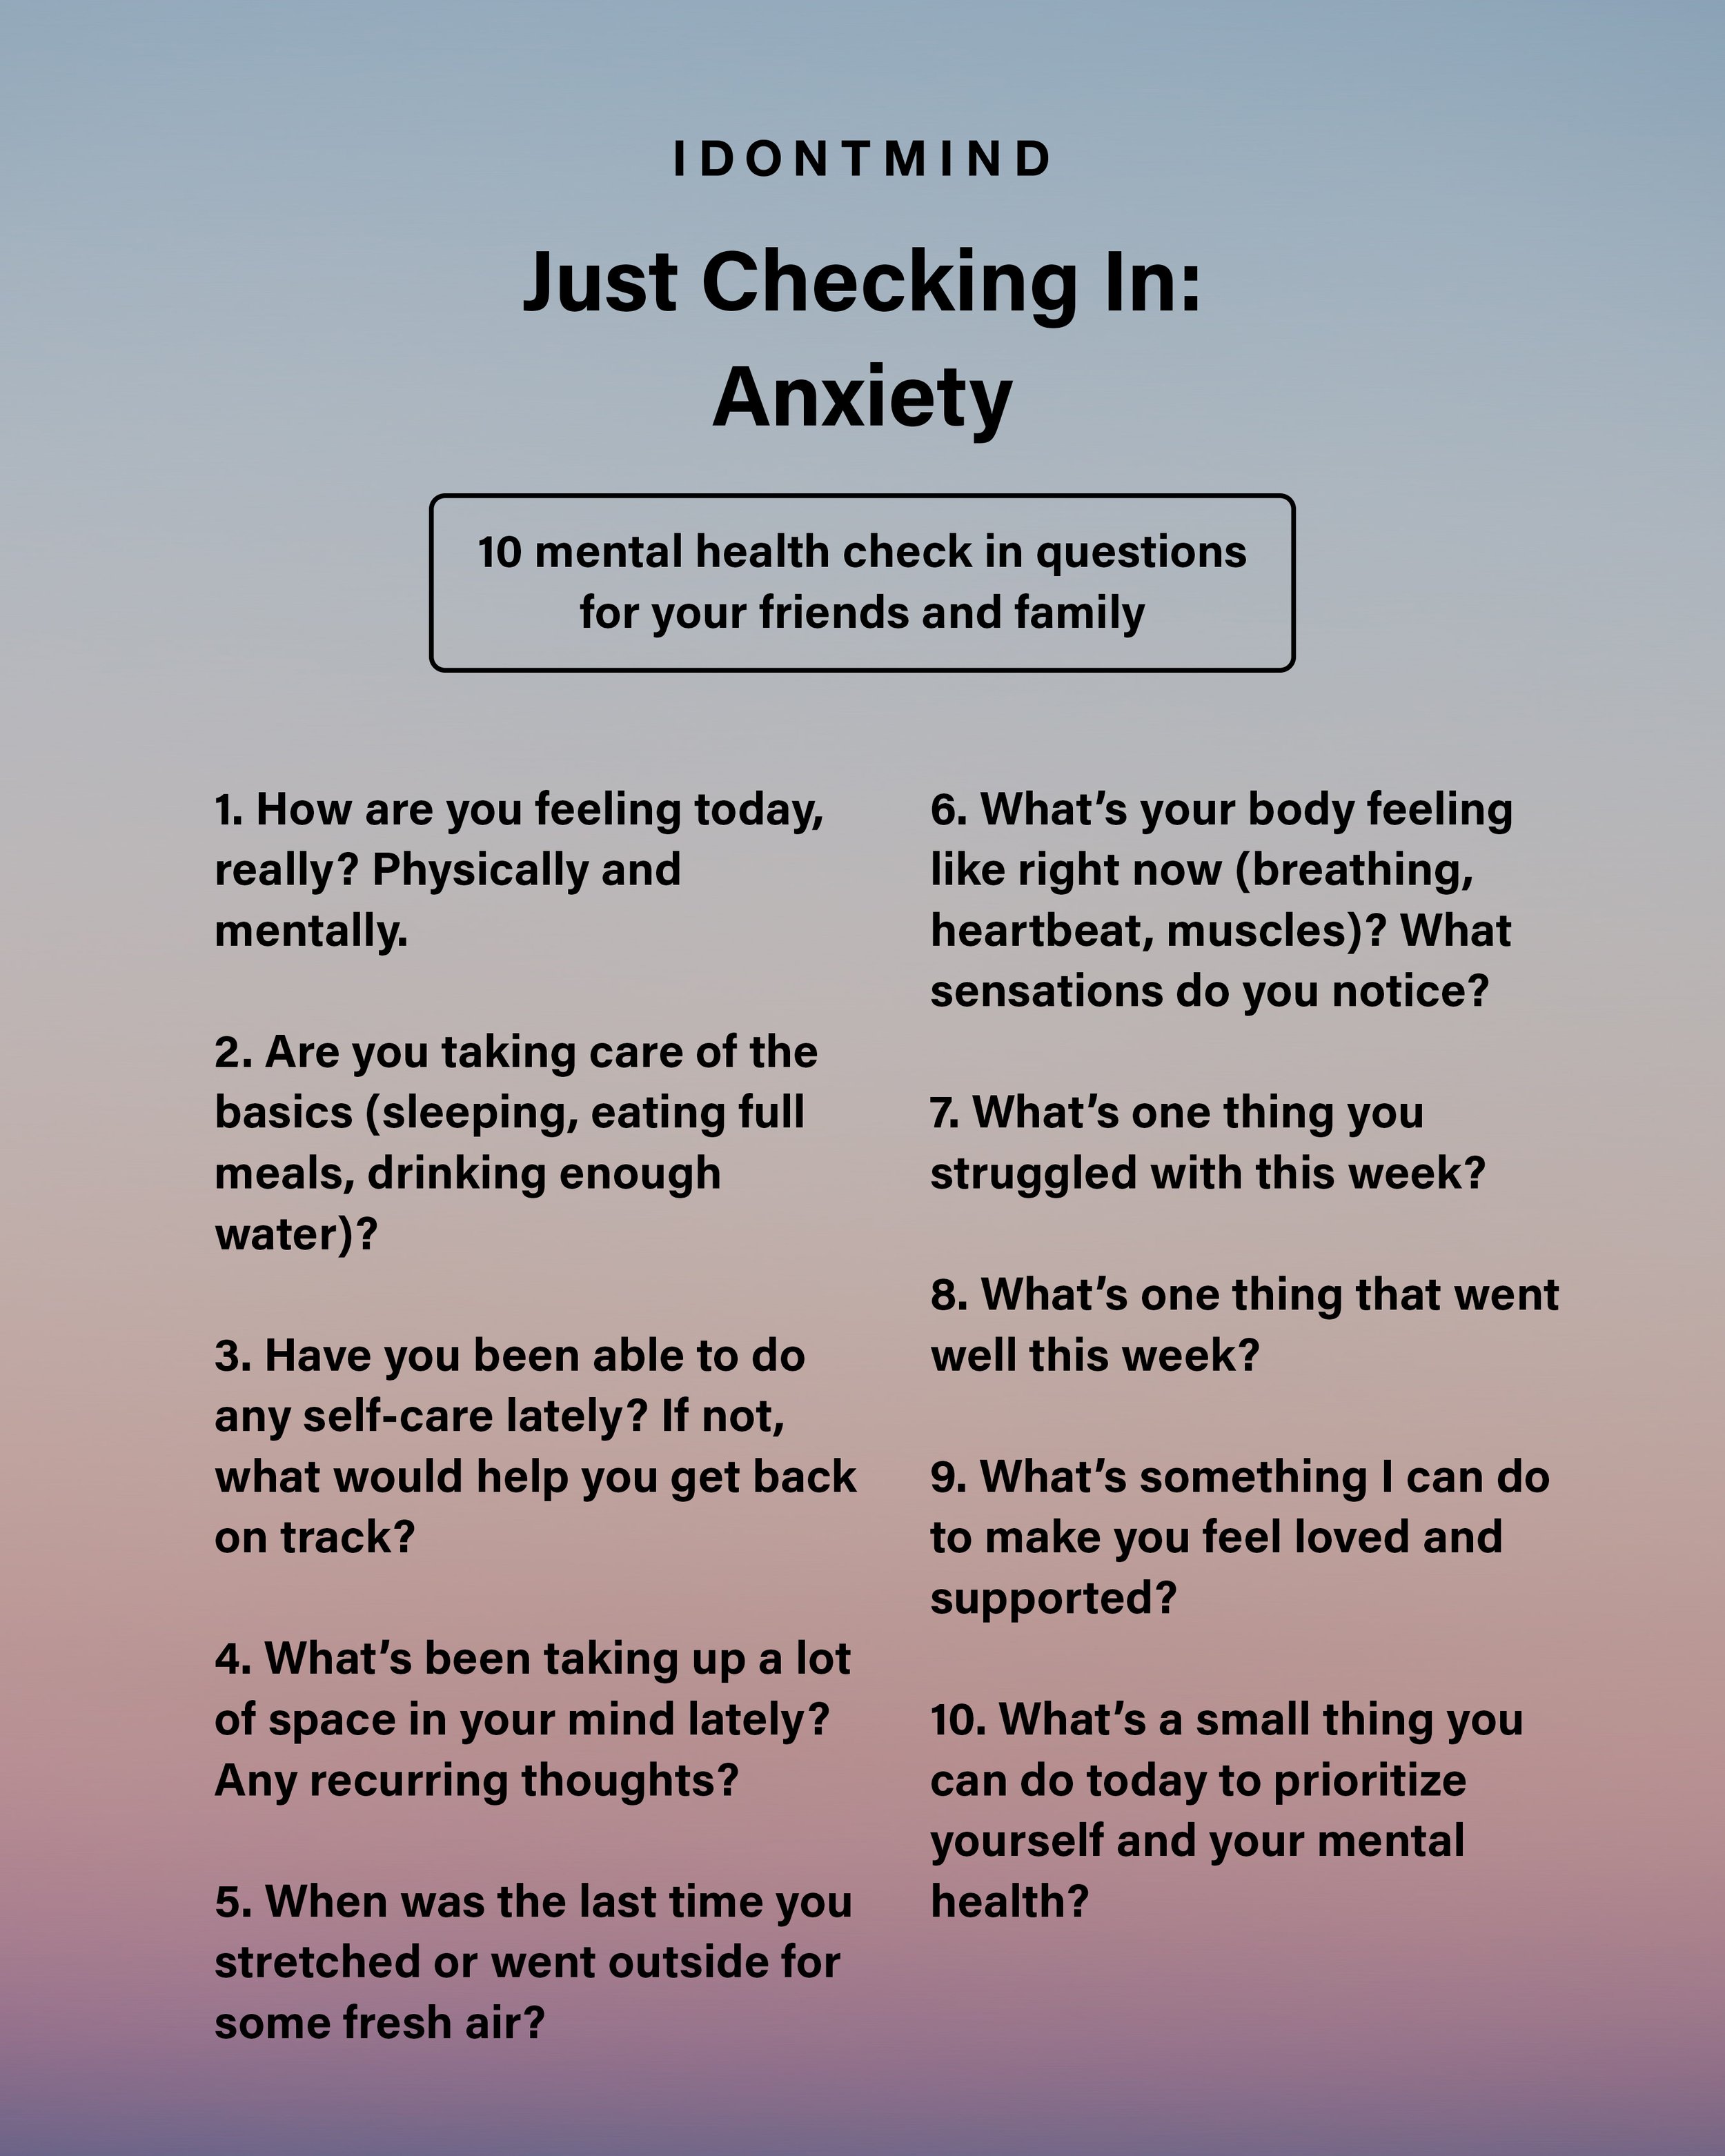 Mental health check-in questions to ask someone with anxiety - IDONTMIND